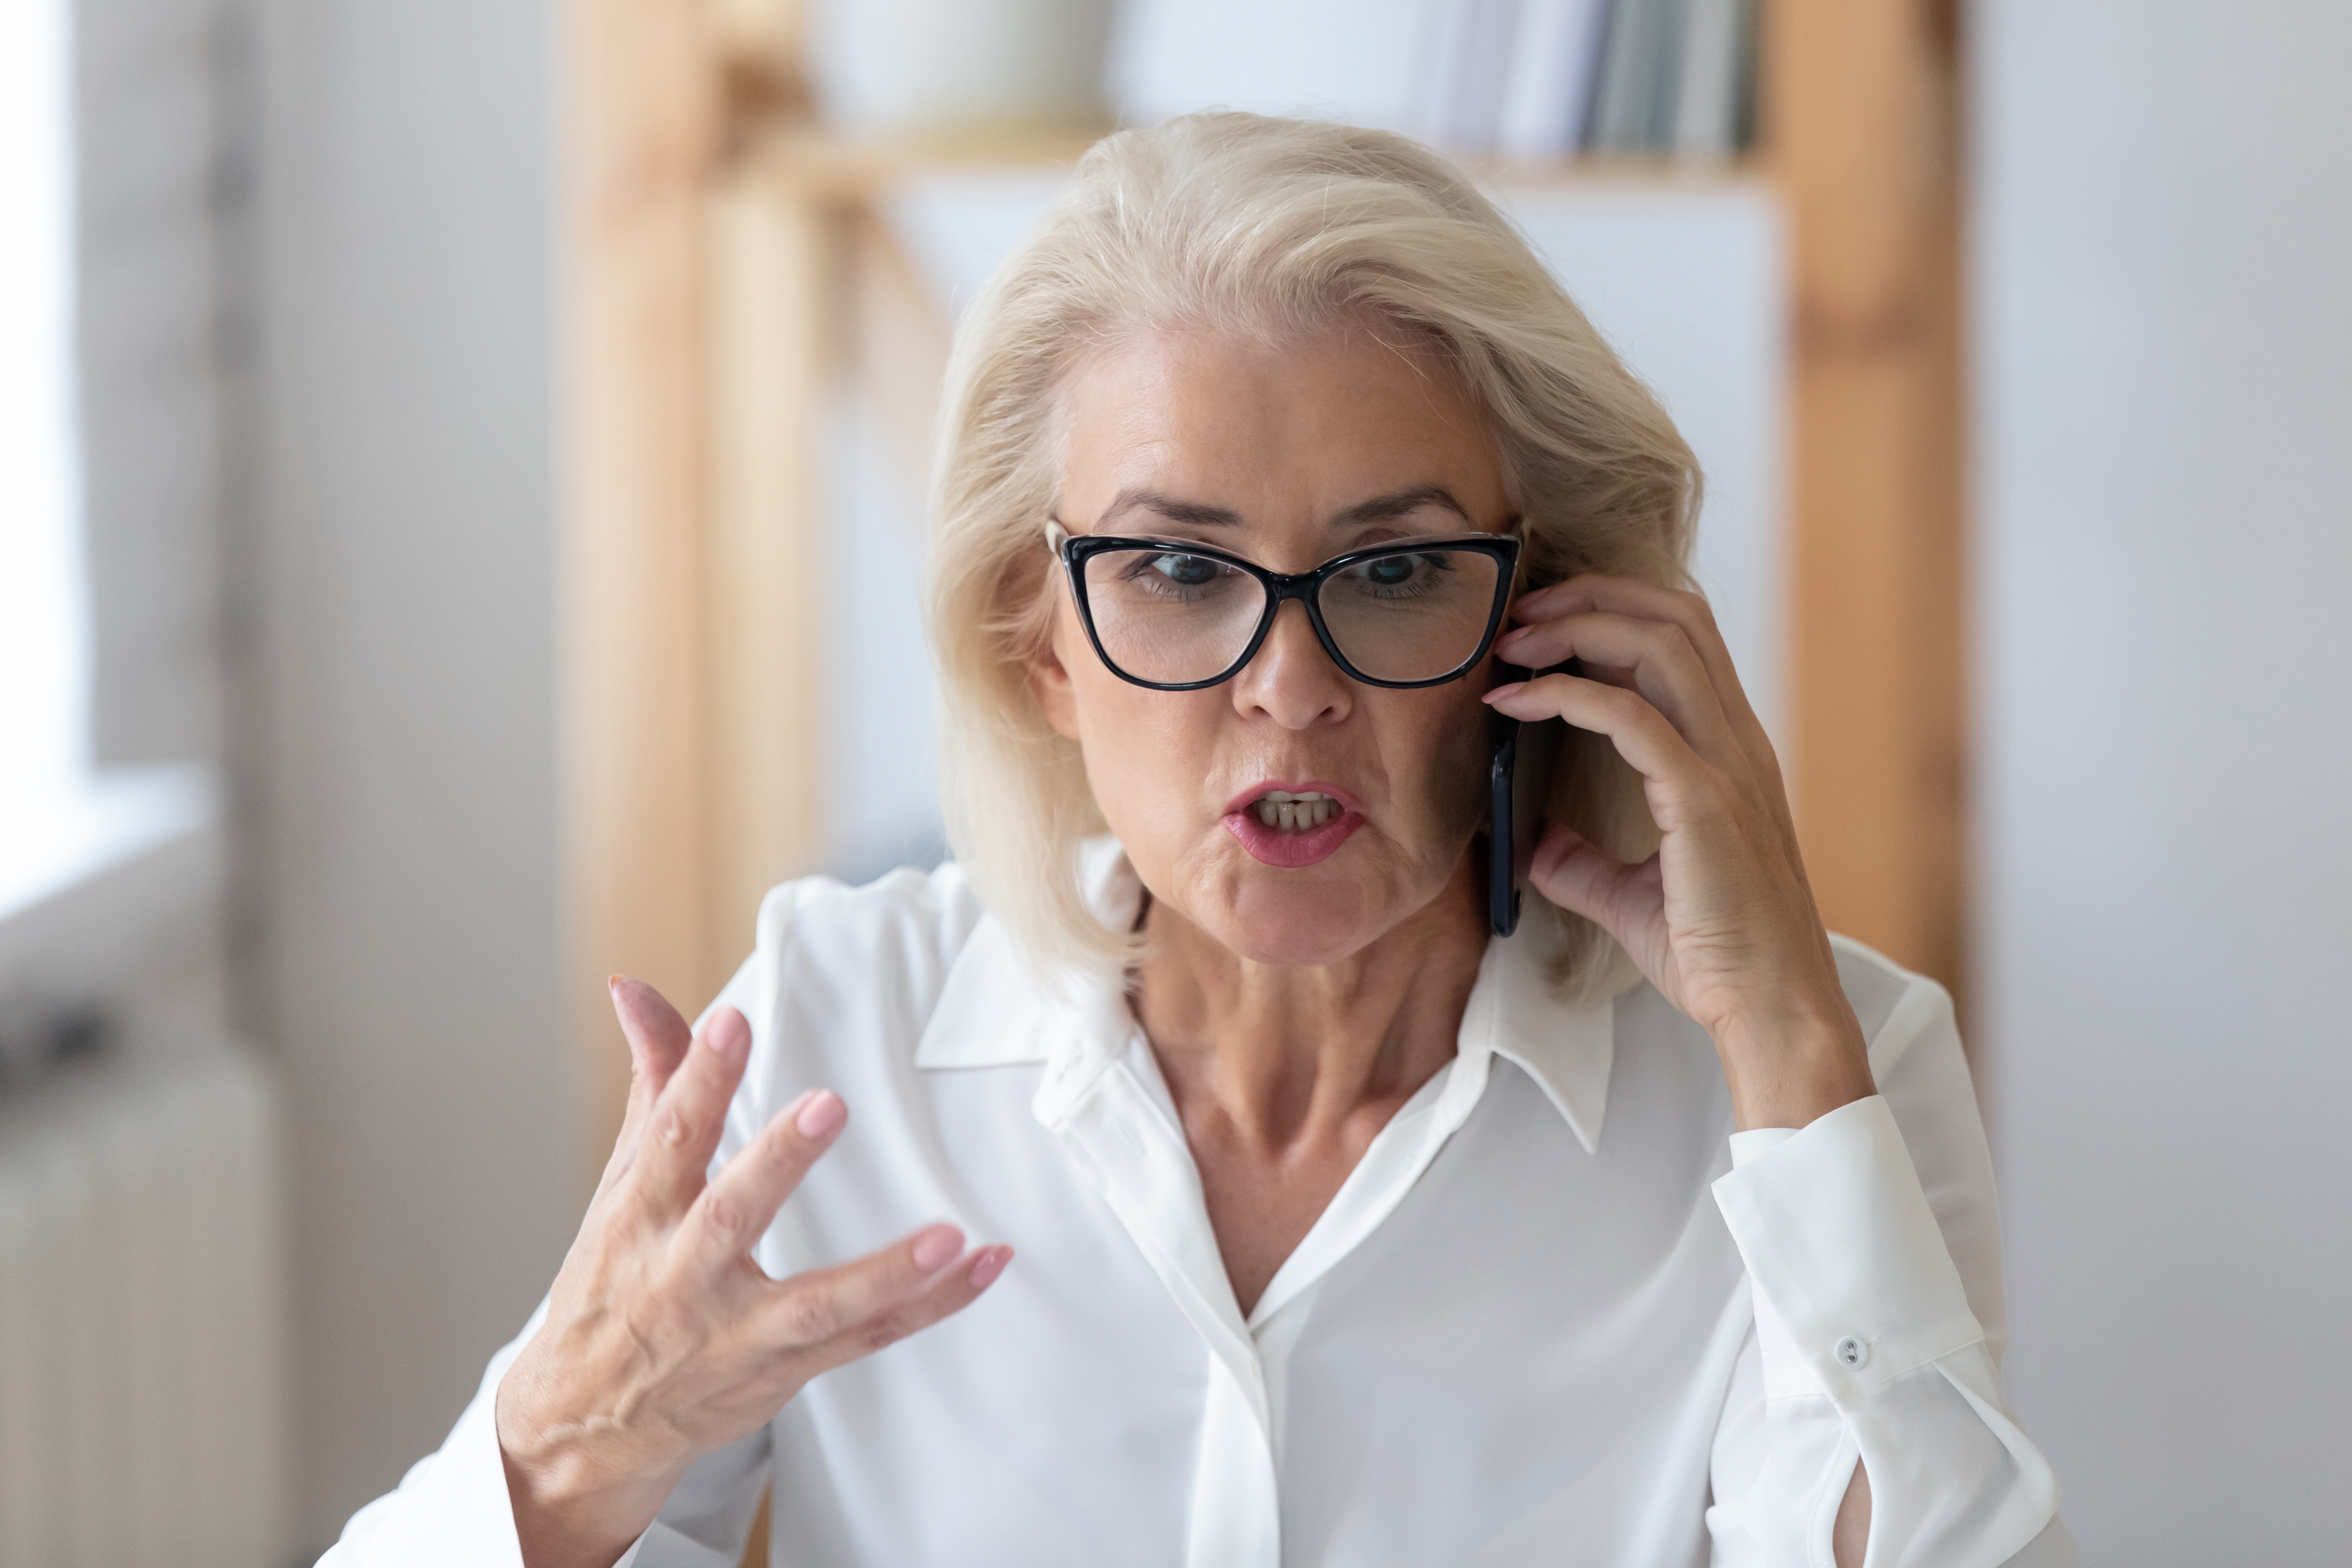 Angry older woman on the phone | Source: Shutterstock